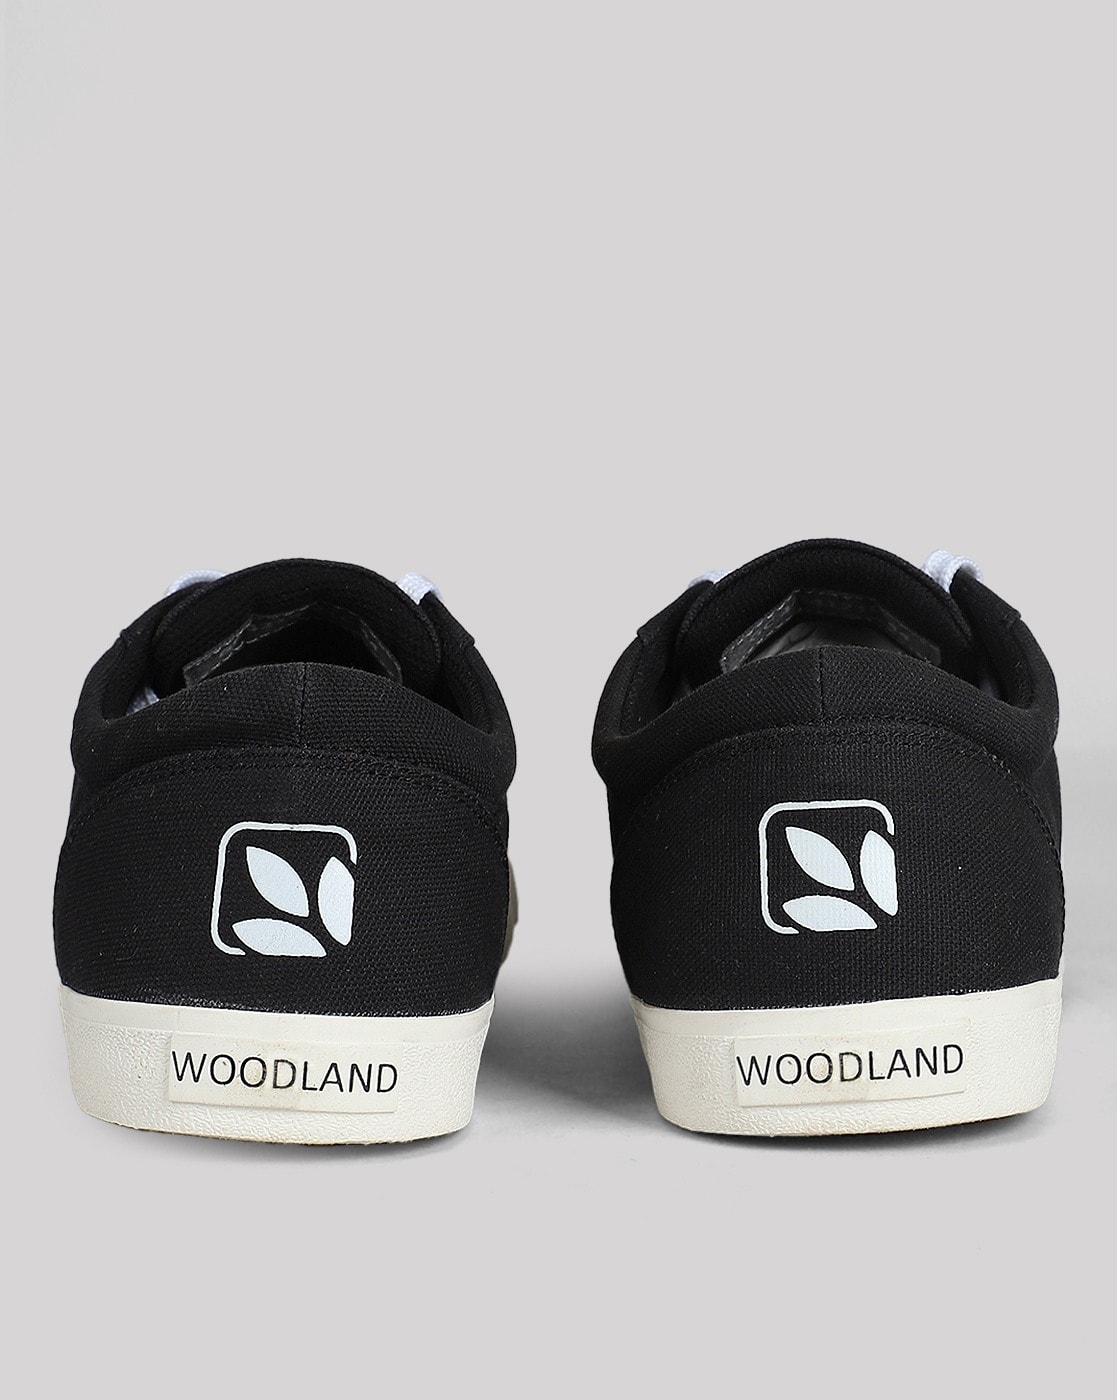 Woodland-shoes-product-life-cycle | PPT